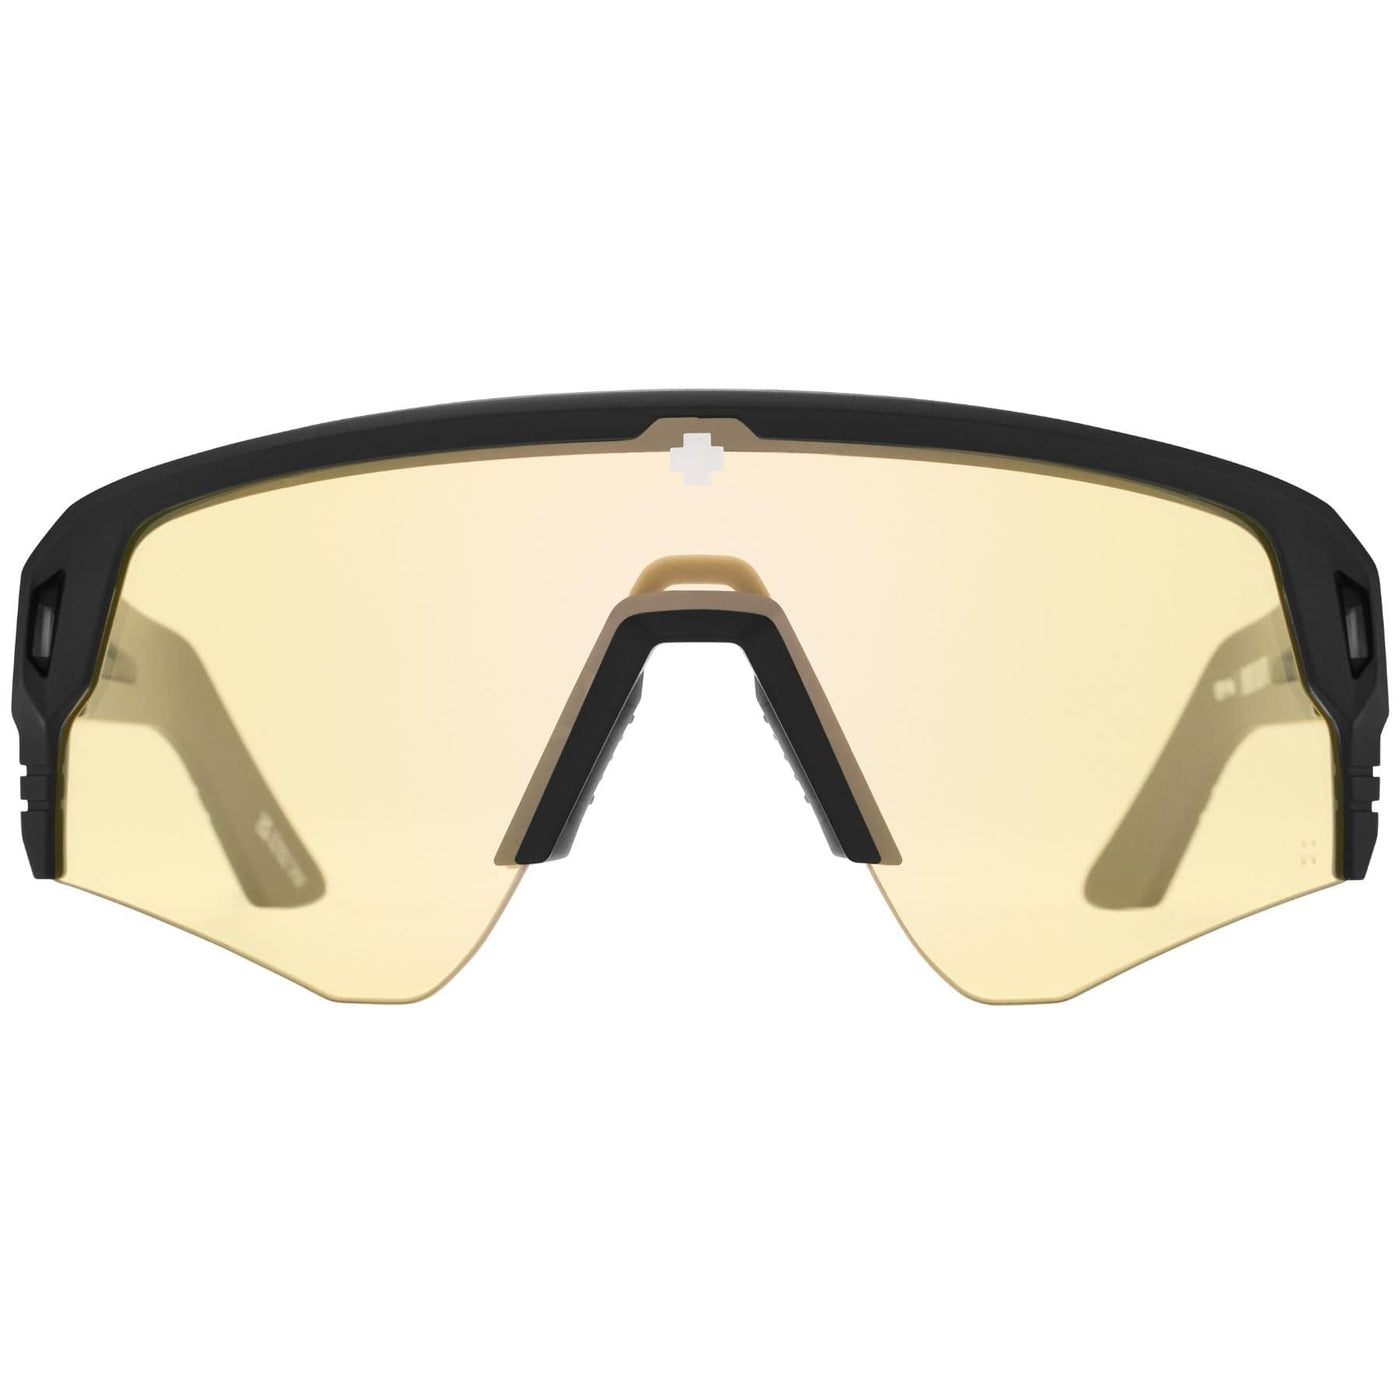 MONOLITH SPEED Sunglasses, Happy Lens - Light Yellow 8Lines Shop - Fast Shipping